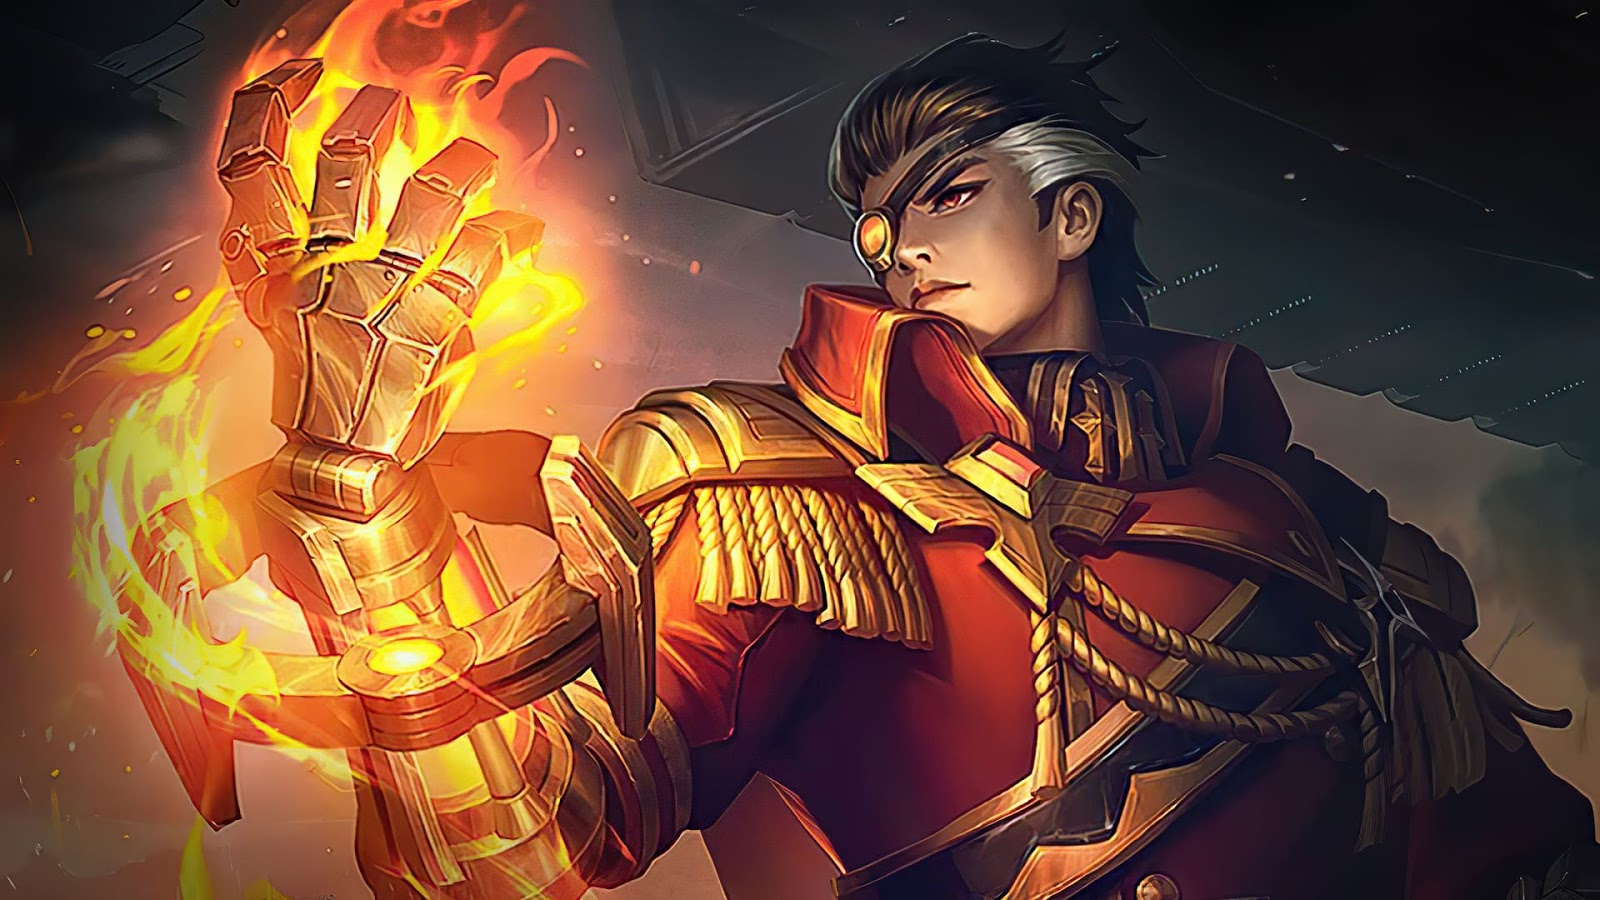 10+ Wallpaper Valir Mobile Legends (ML) Full HD for PC, Android & iOS